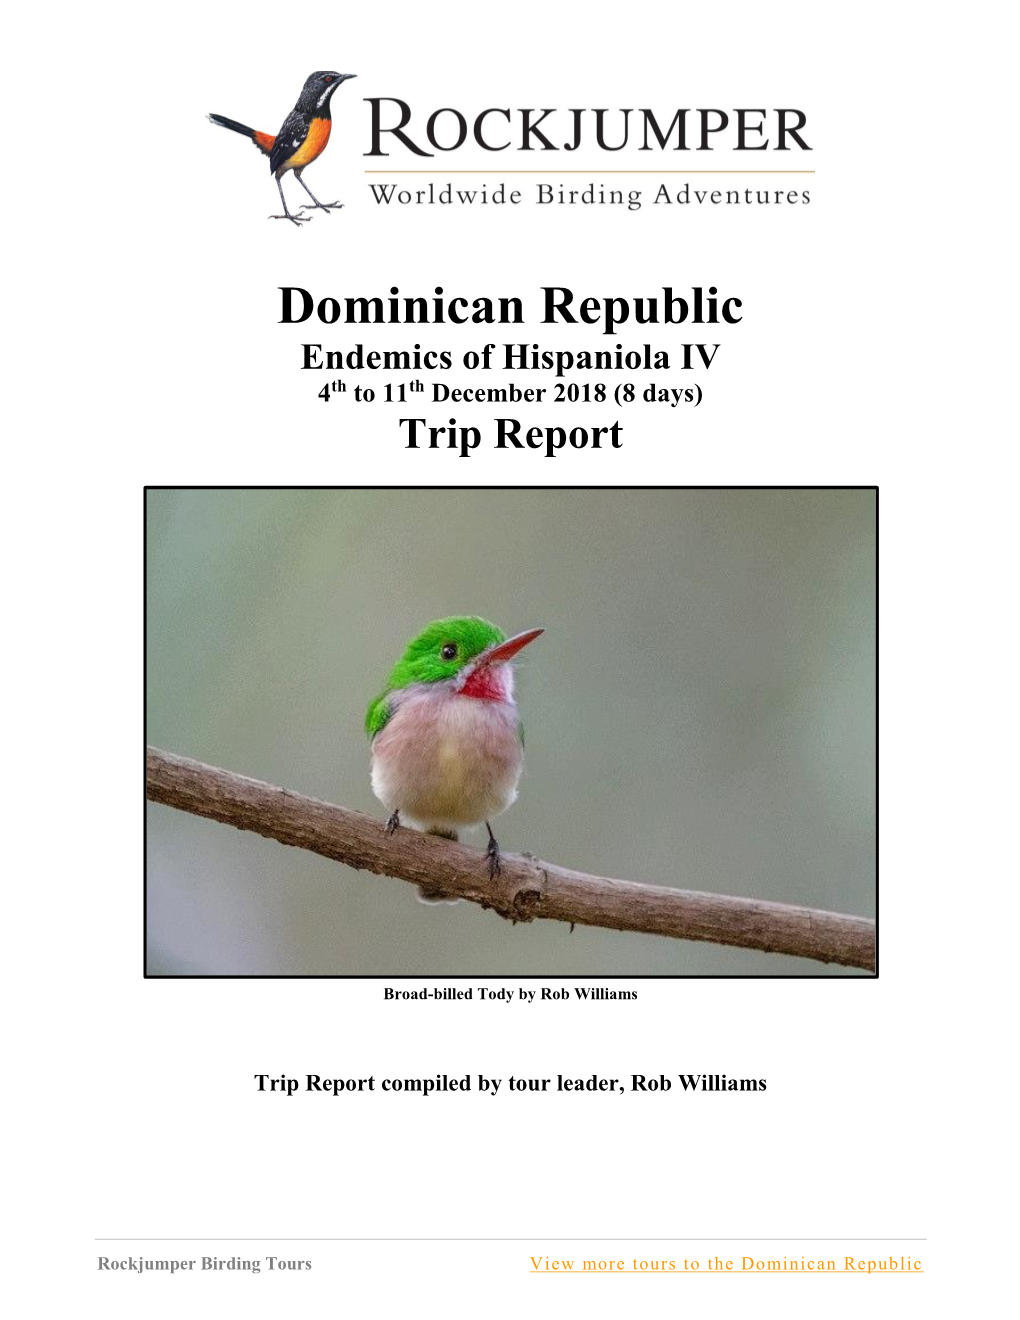 Dominican Republic Endemics of Hispaniola IV 4Th to 11Th December 2018 (8 Days) Trip Report